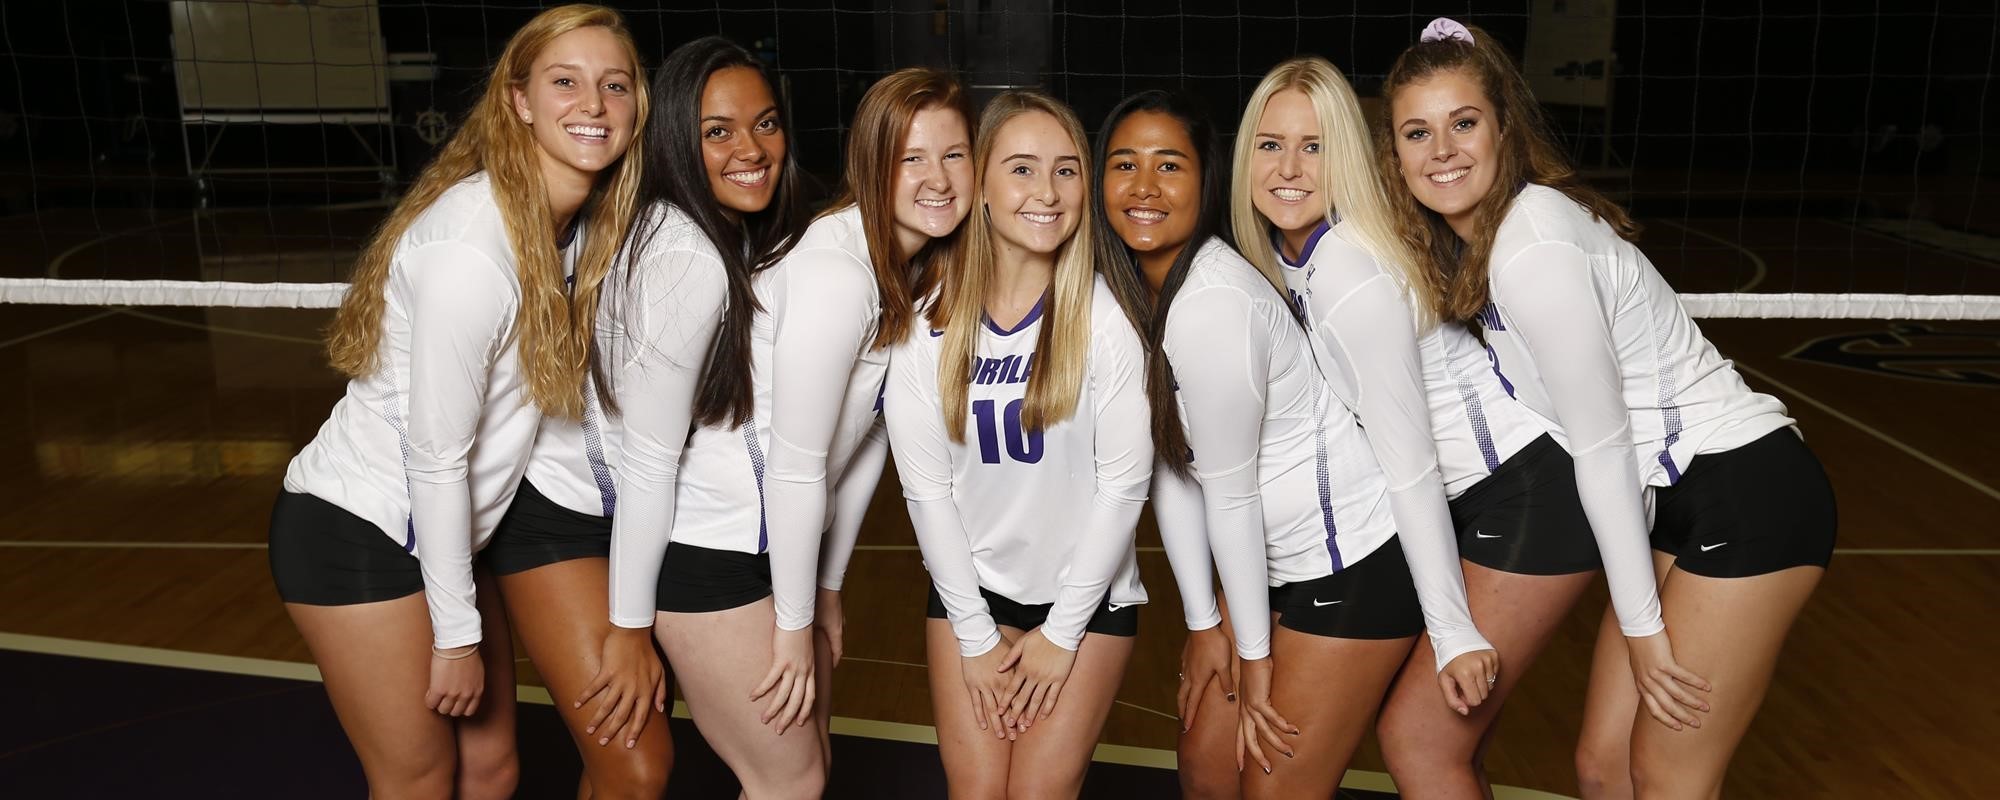 Get To Know The 2017 University of Portland Volleyball